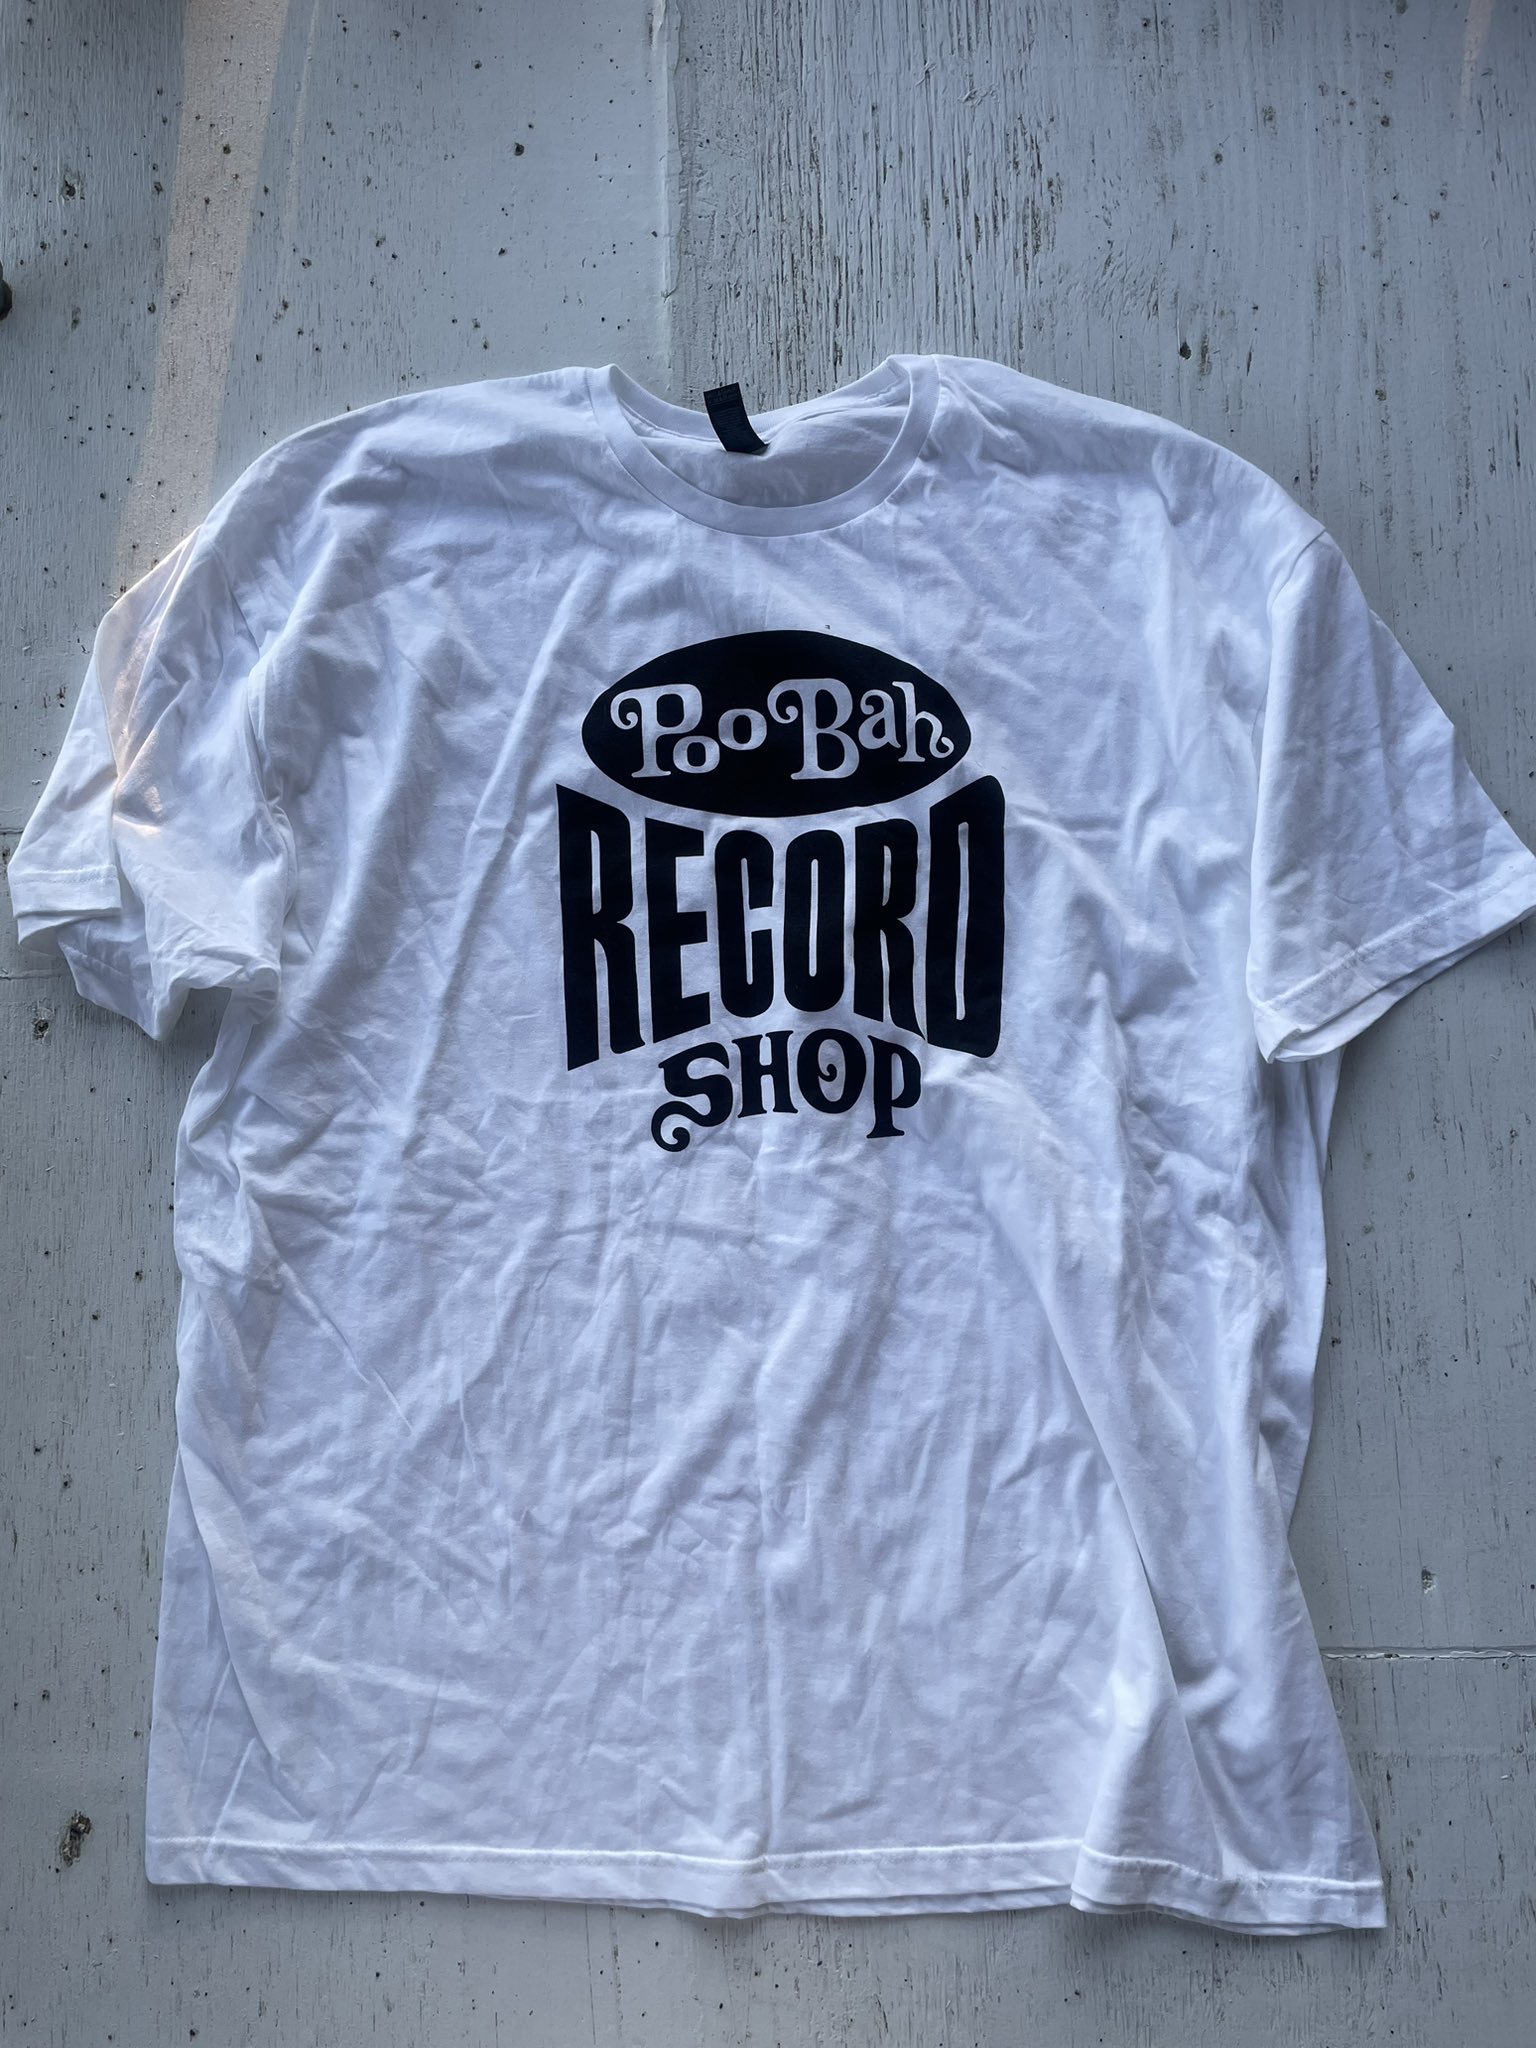 POOBAH RECORDS T shirts / new /3XL 